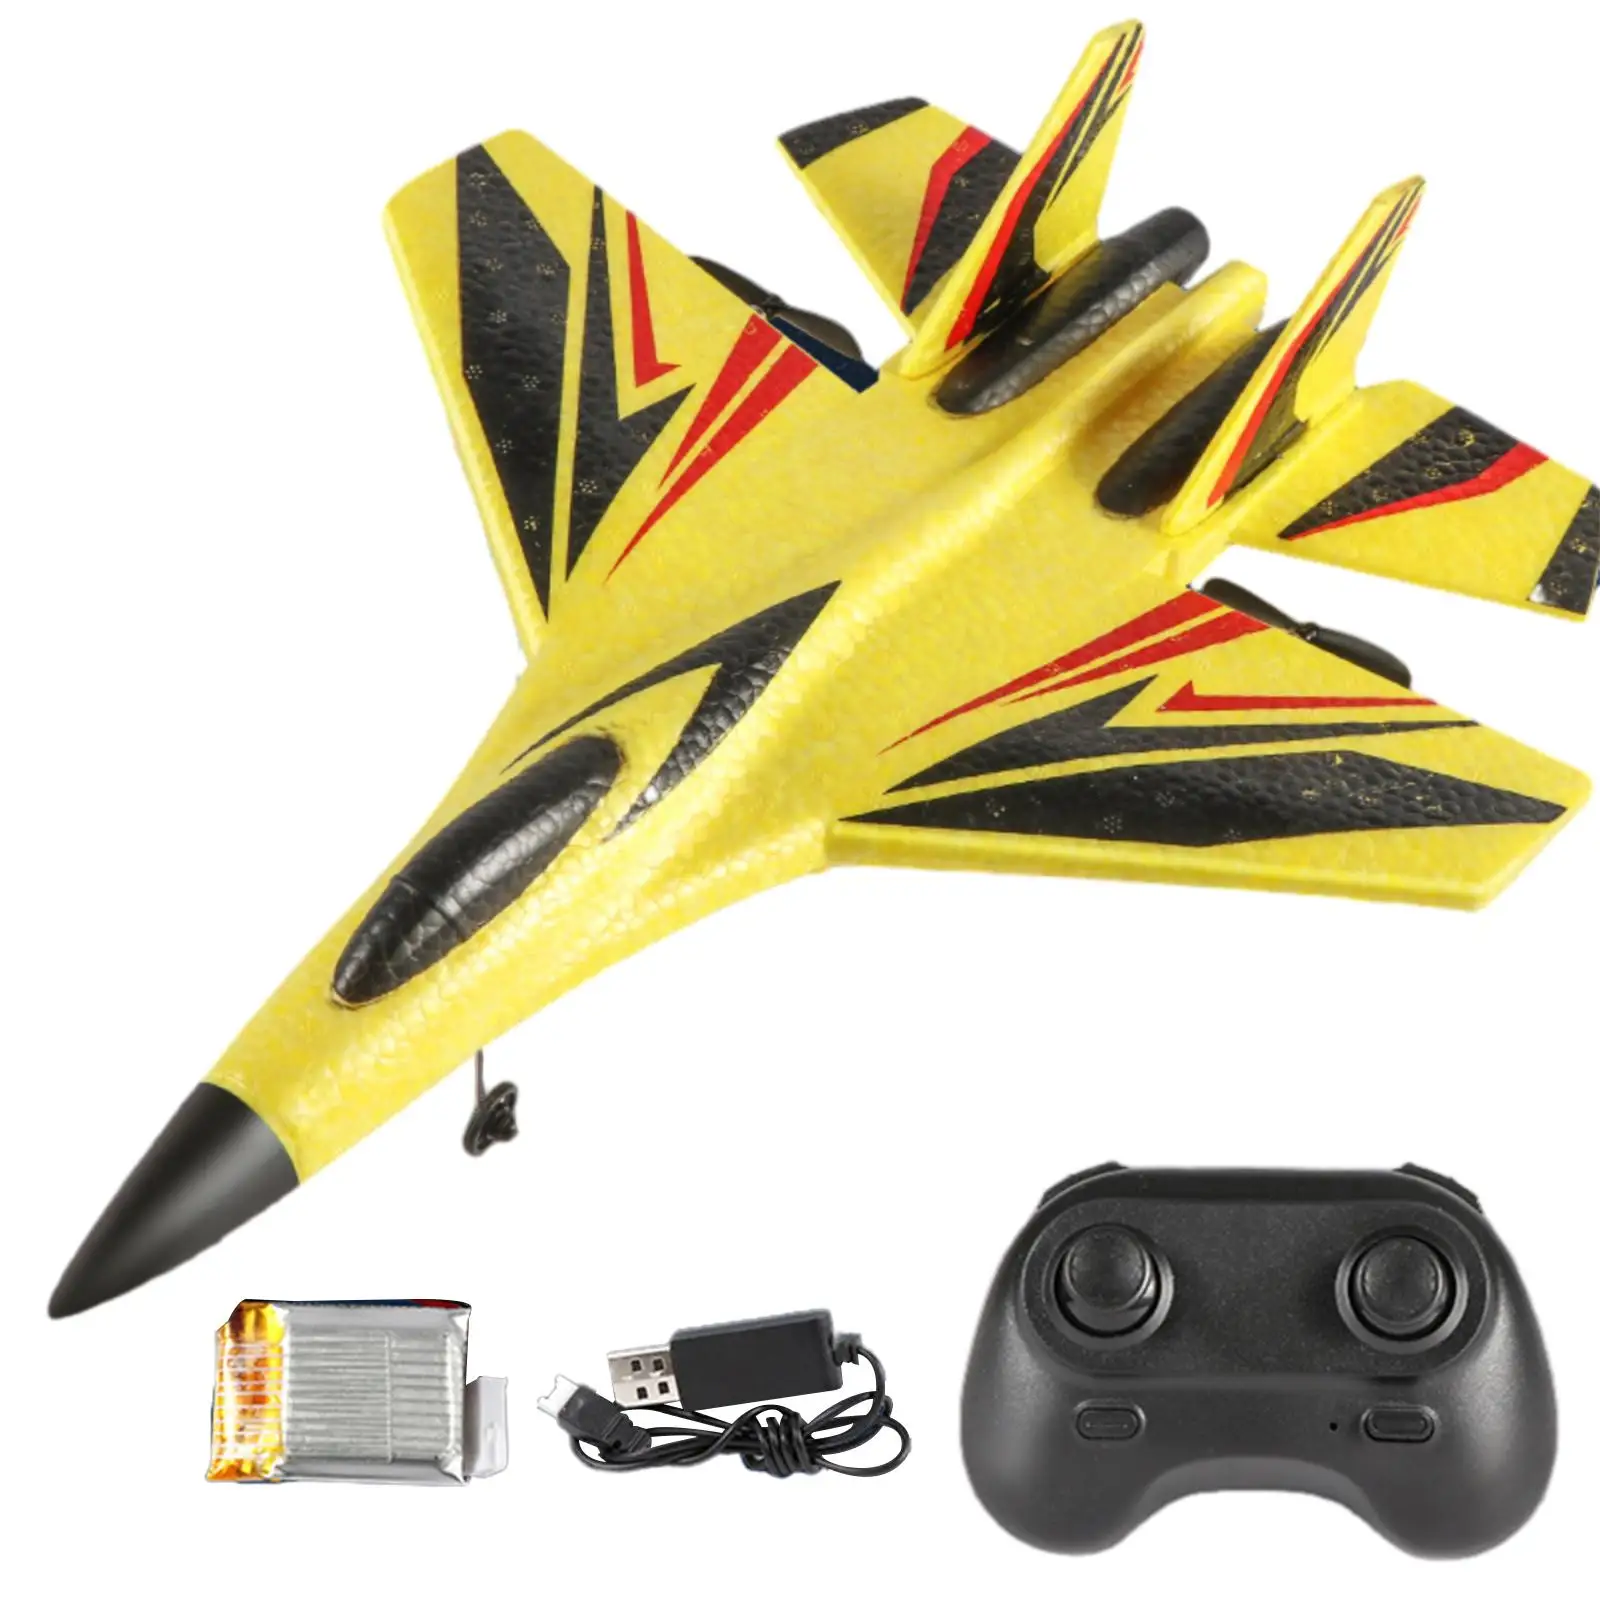 Remote Control Aircraft SU30 Aircraft Model Toys with Light Durable Jet Fighter Toys for Children Adults Beginner Birthday Gifts